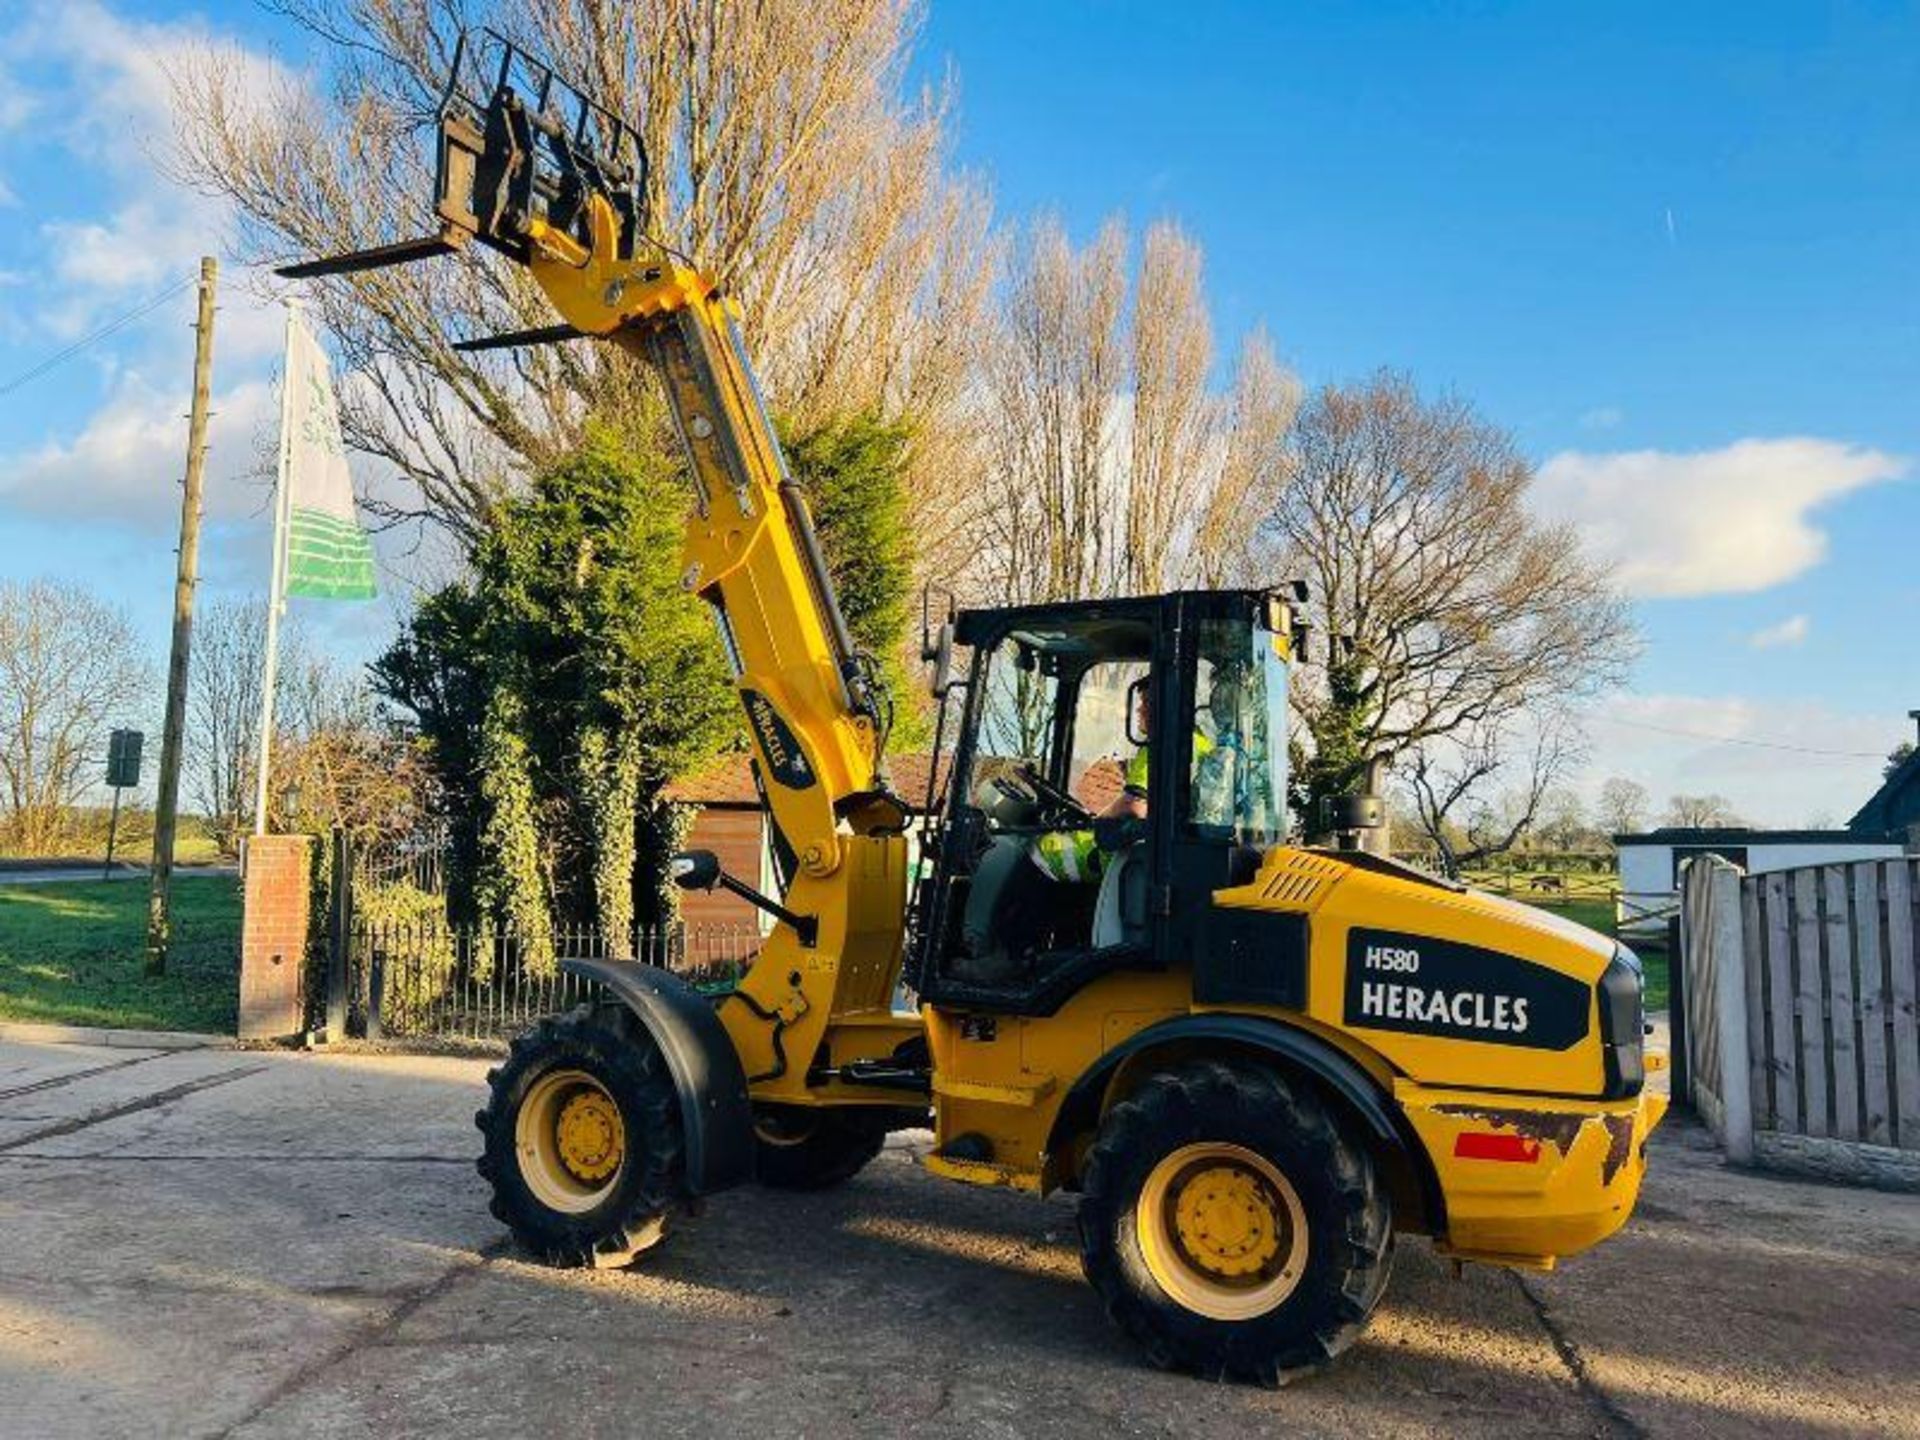 HERACLES H580 4WD TELEHANDLER * YEAR 2019 * C/W QUICK HITCH & PALLET TINES - Image 7 of 14